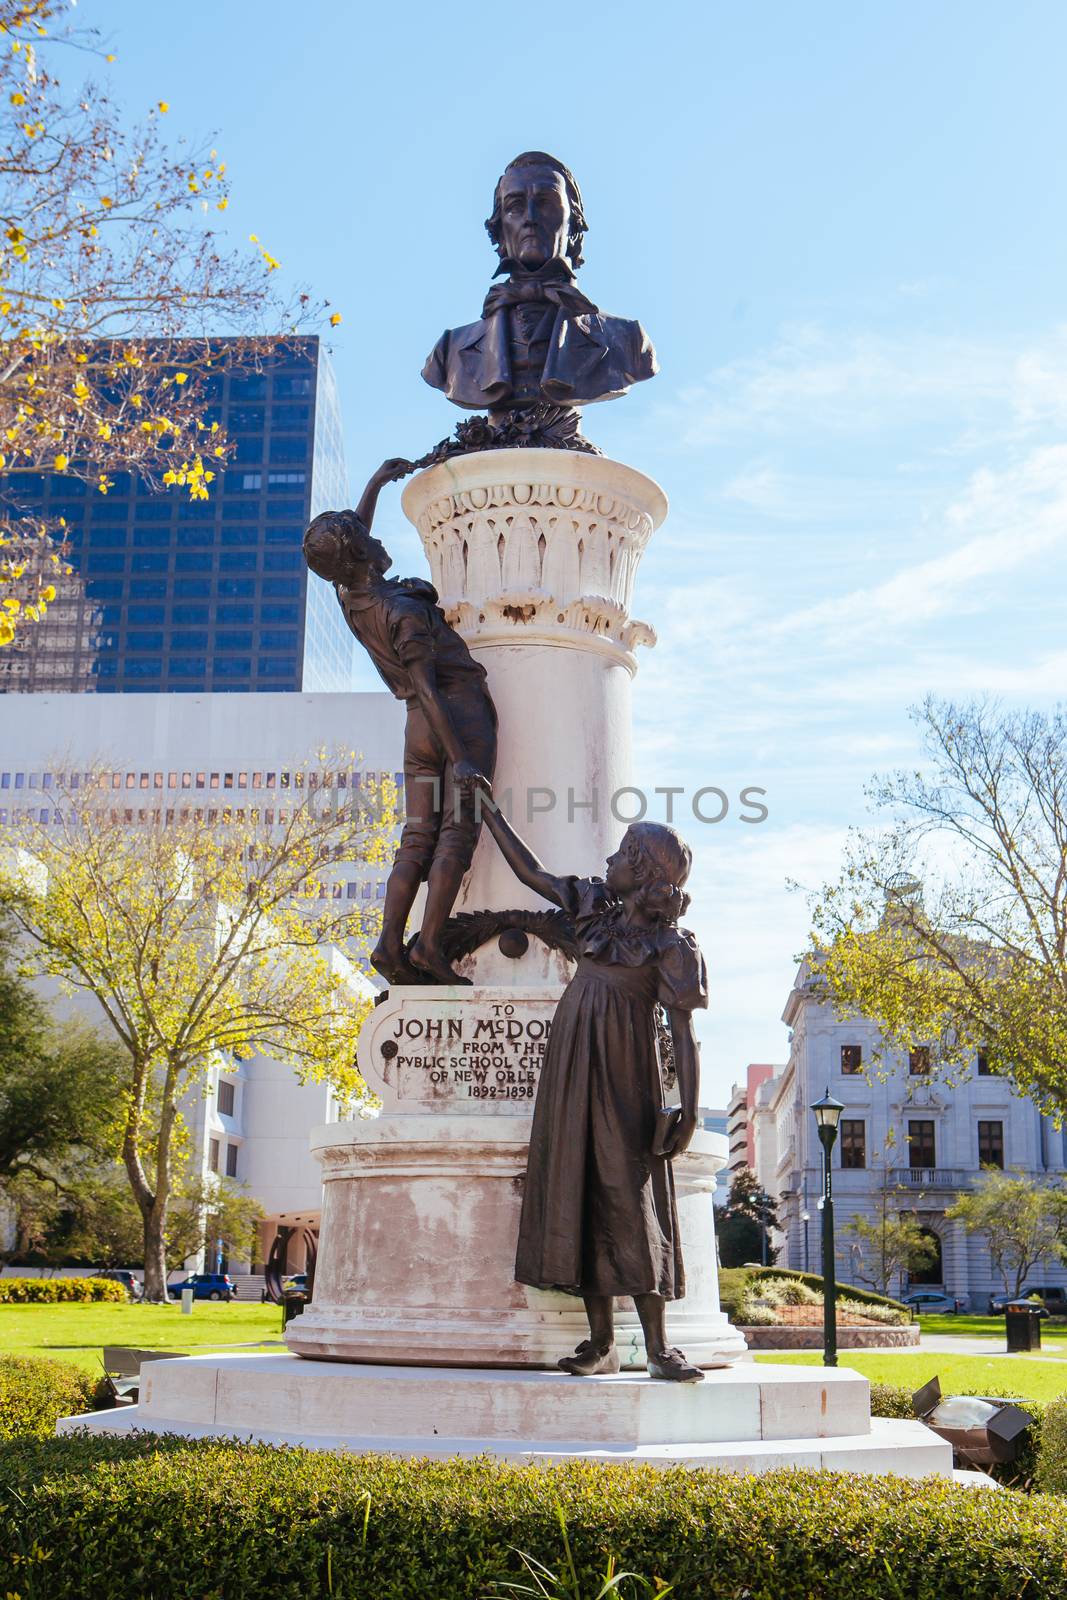 New Orleans, USA - January 21 2013: John McDonogh Monument in Lafayette Square in New Orleans, Louisiana, USA